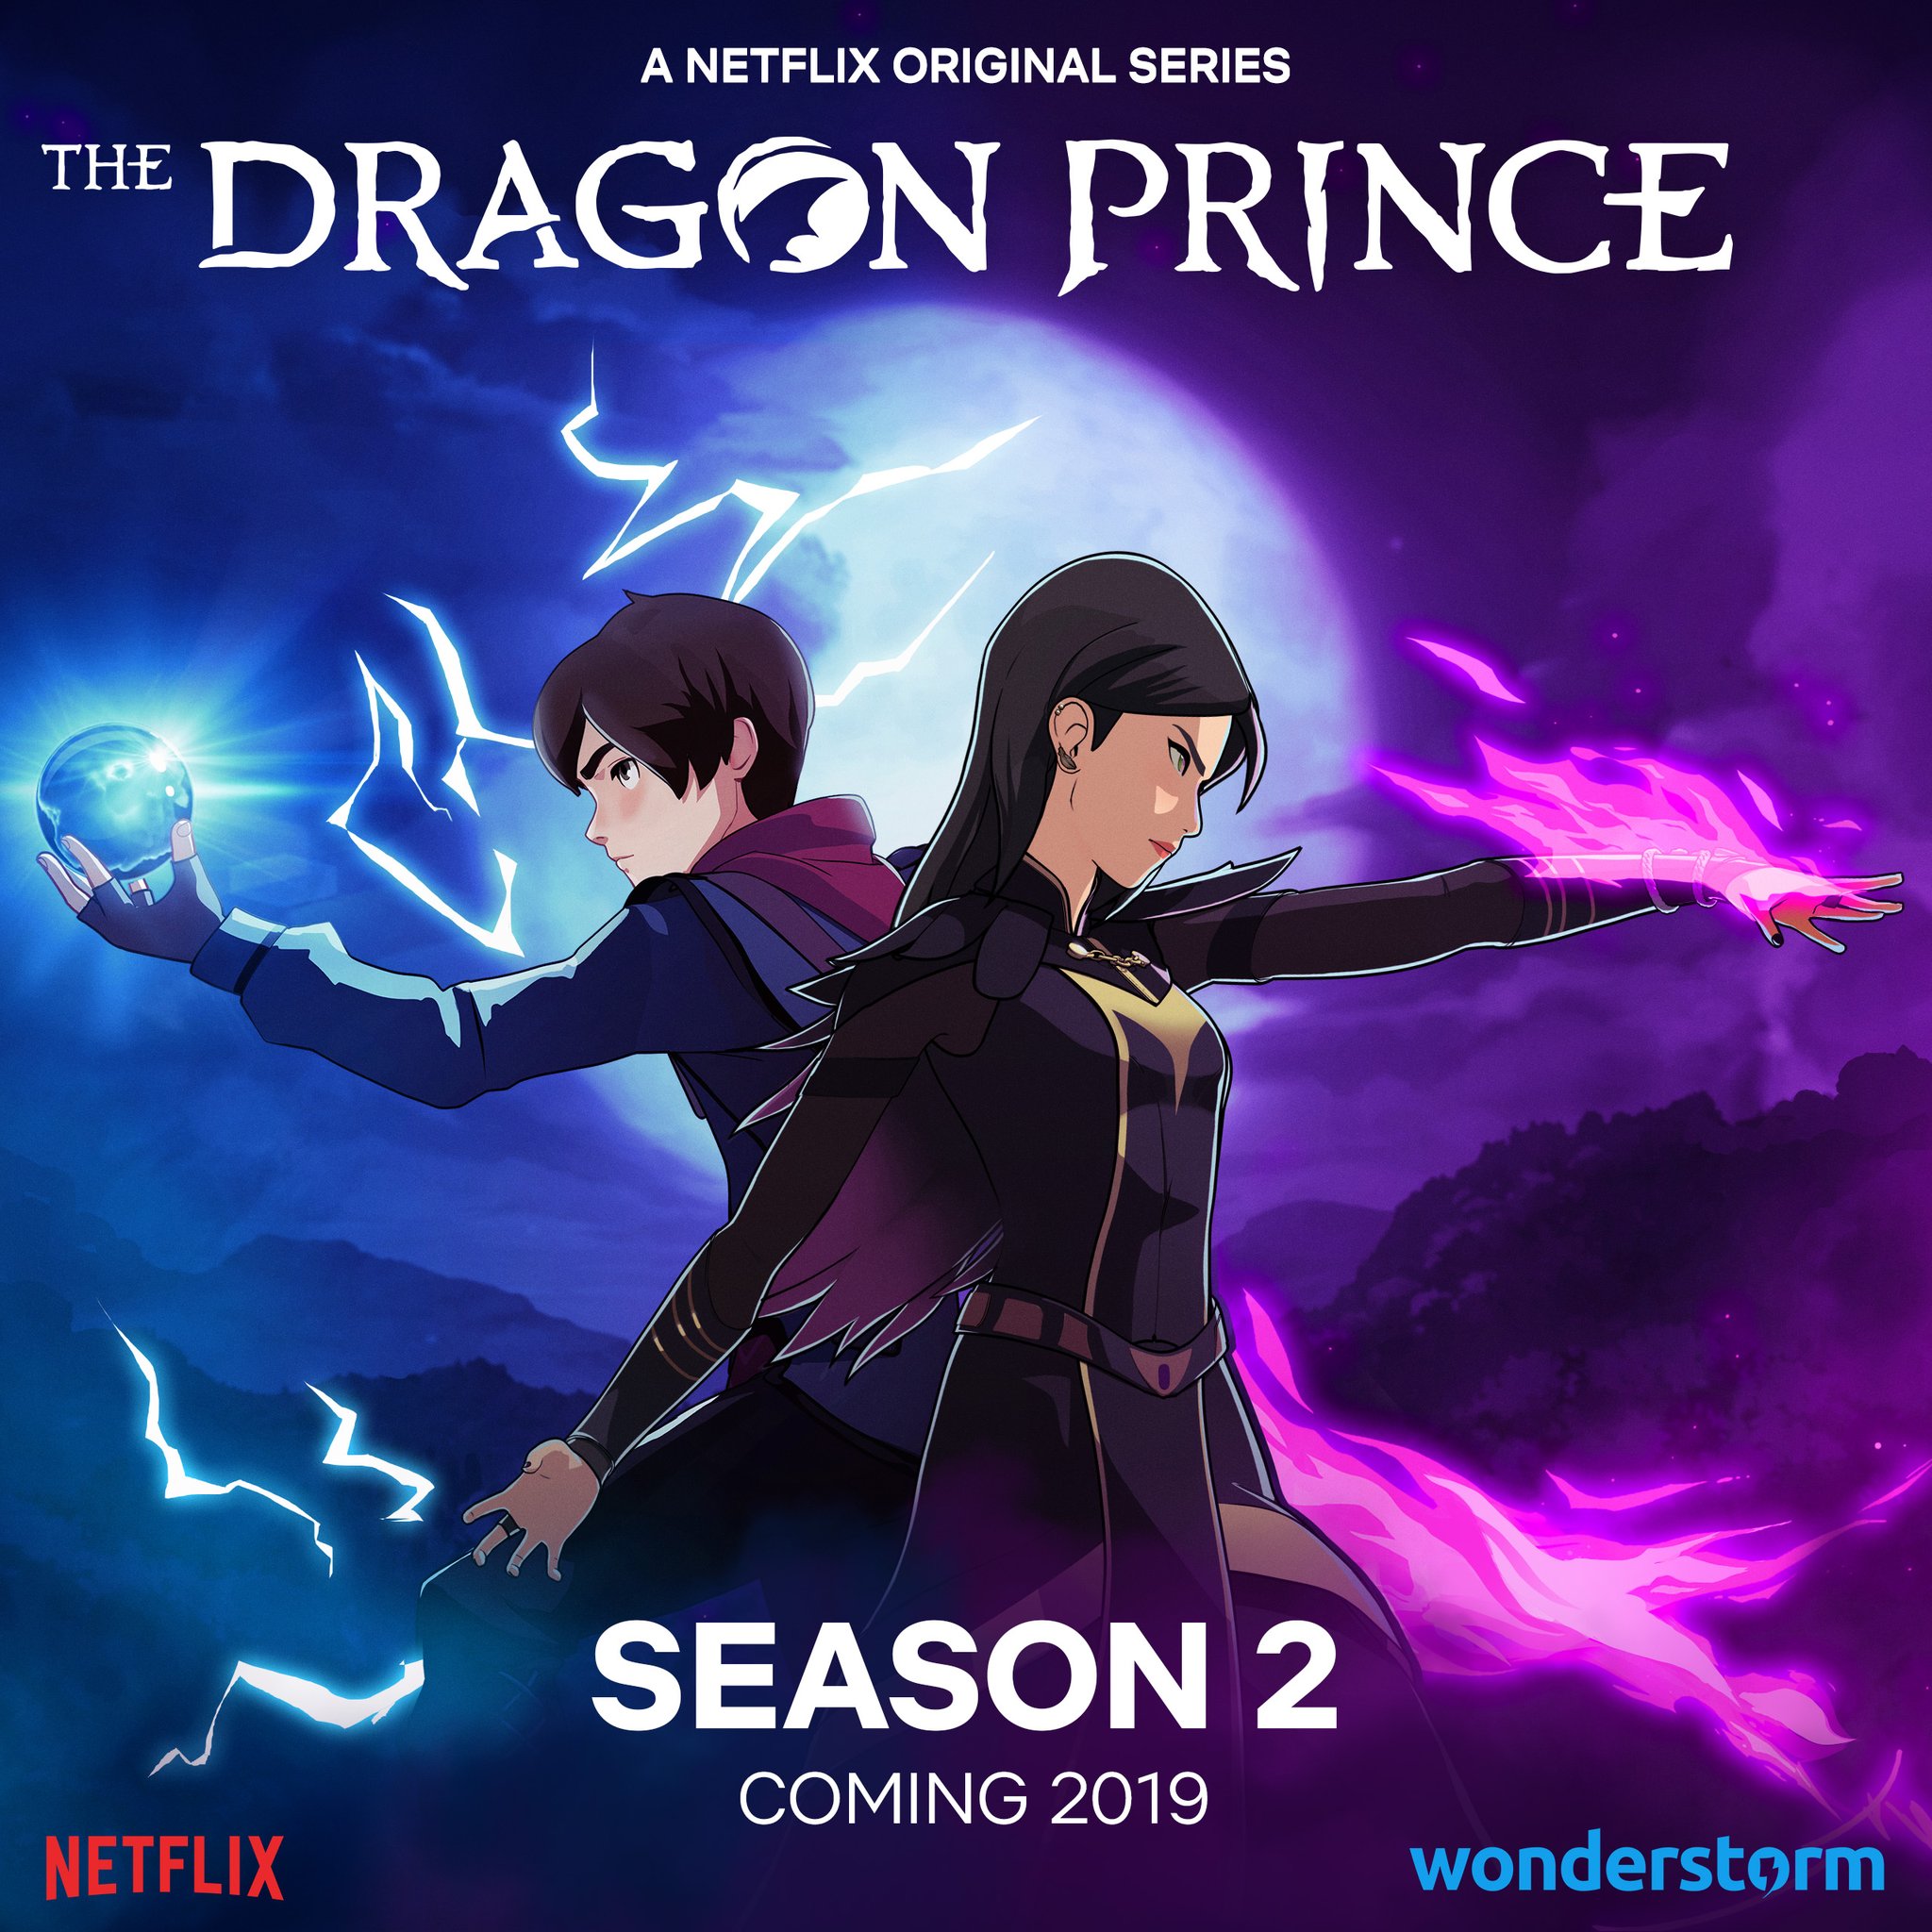 The Dragon Prince Season 2 Trailer and Release Date | Den of Geek